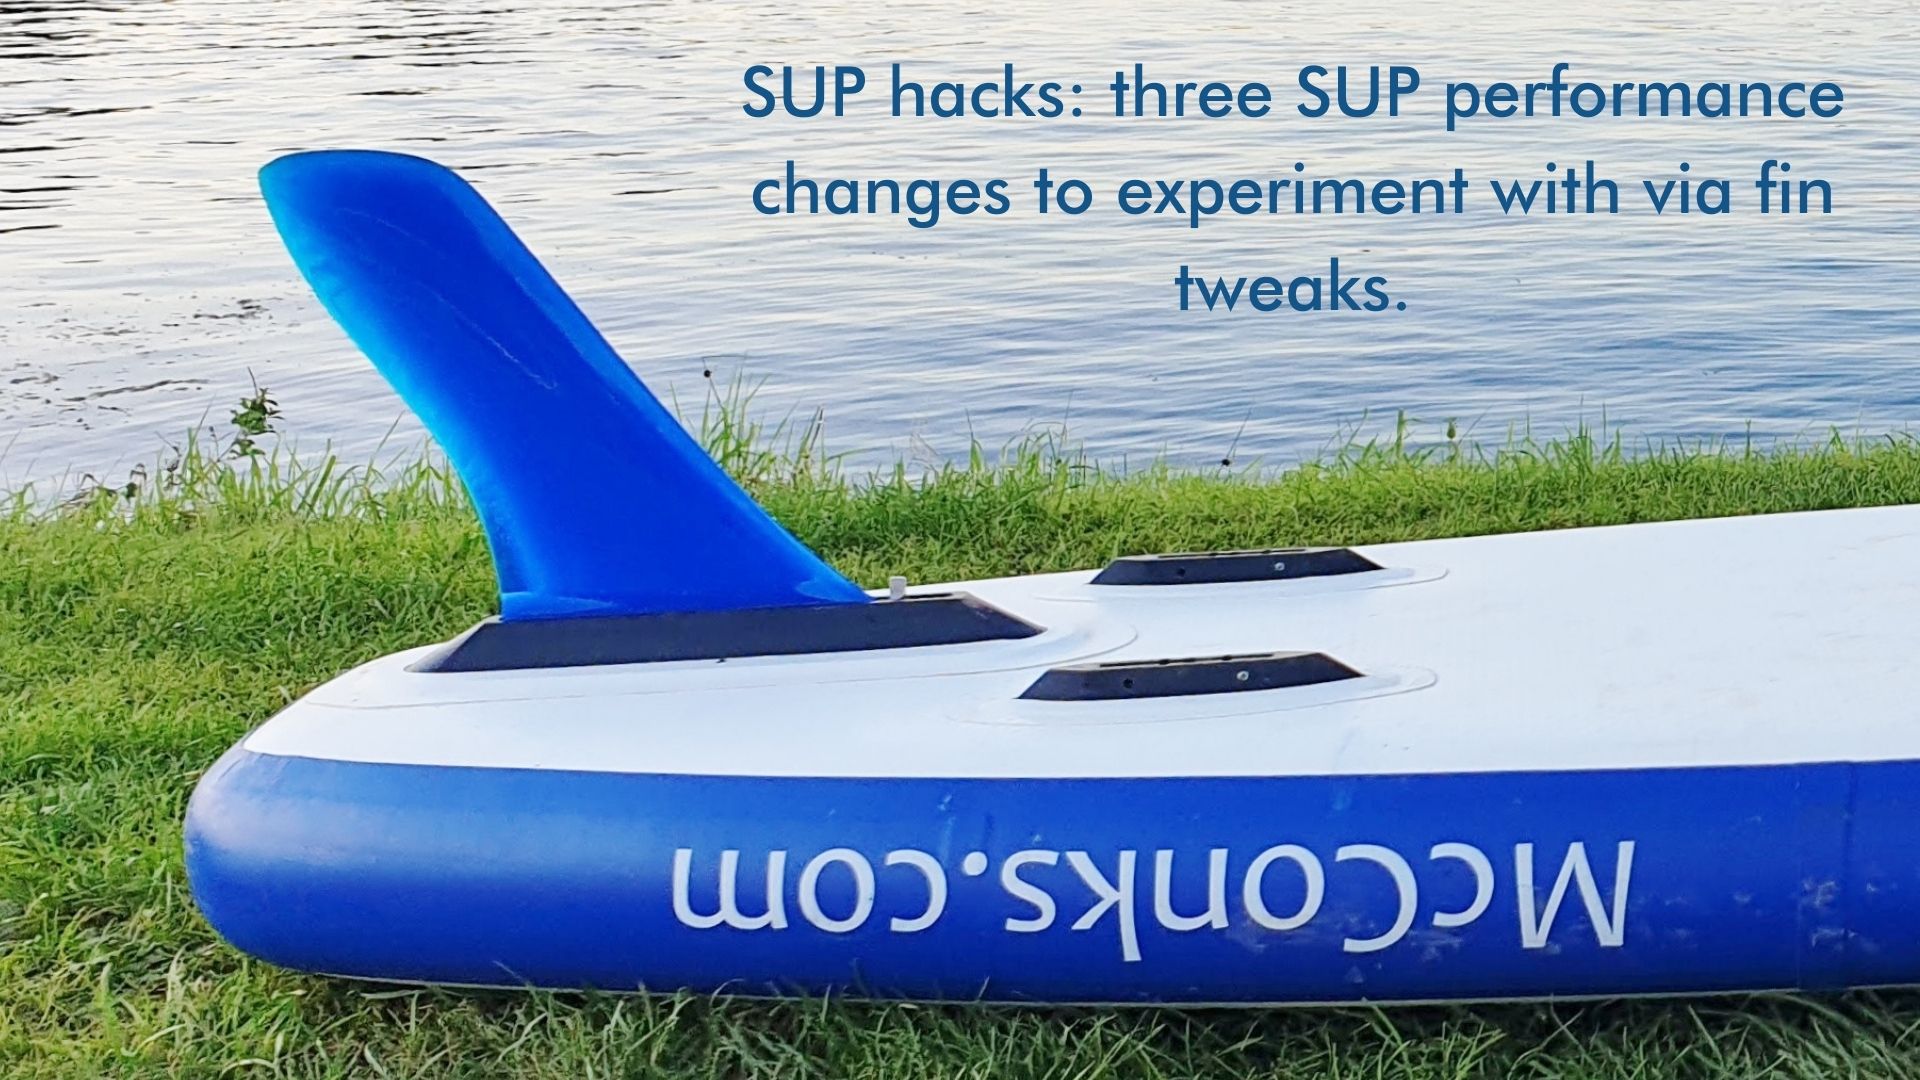 You are currently viewing SUP hacks: three SUP performance changes to experiment with via fin tweaks.